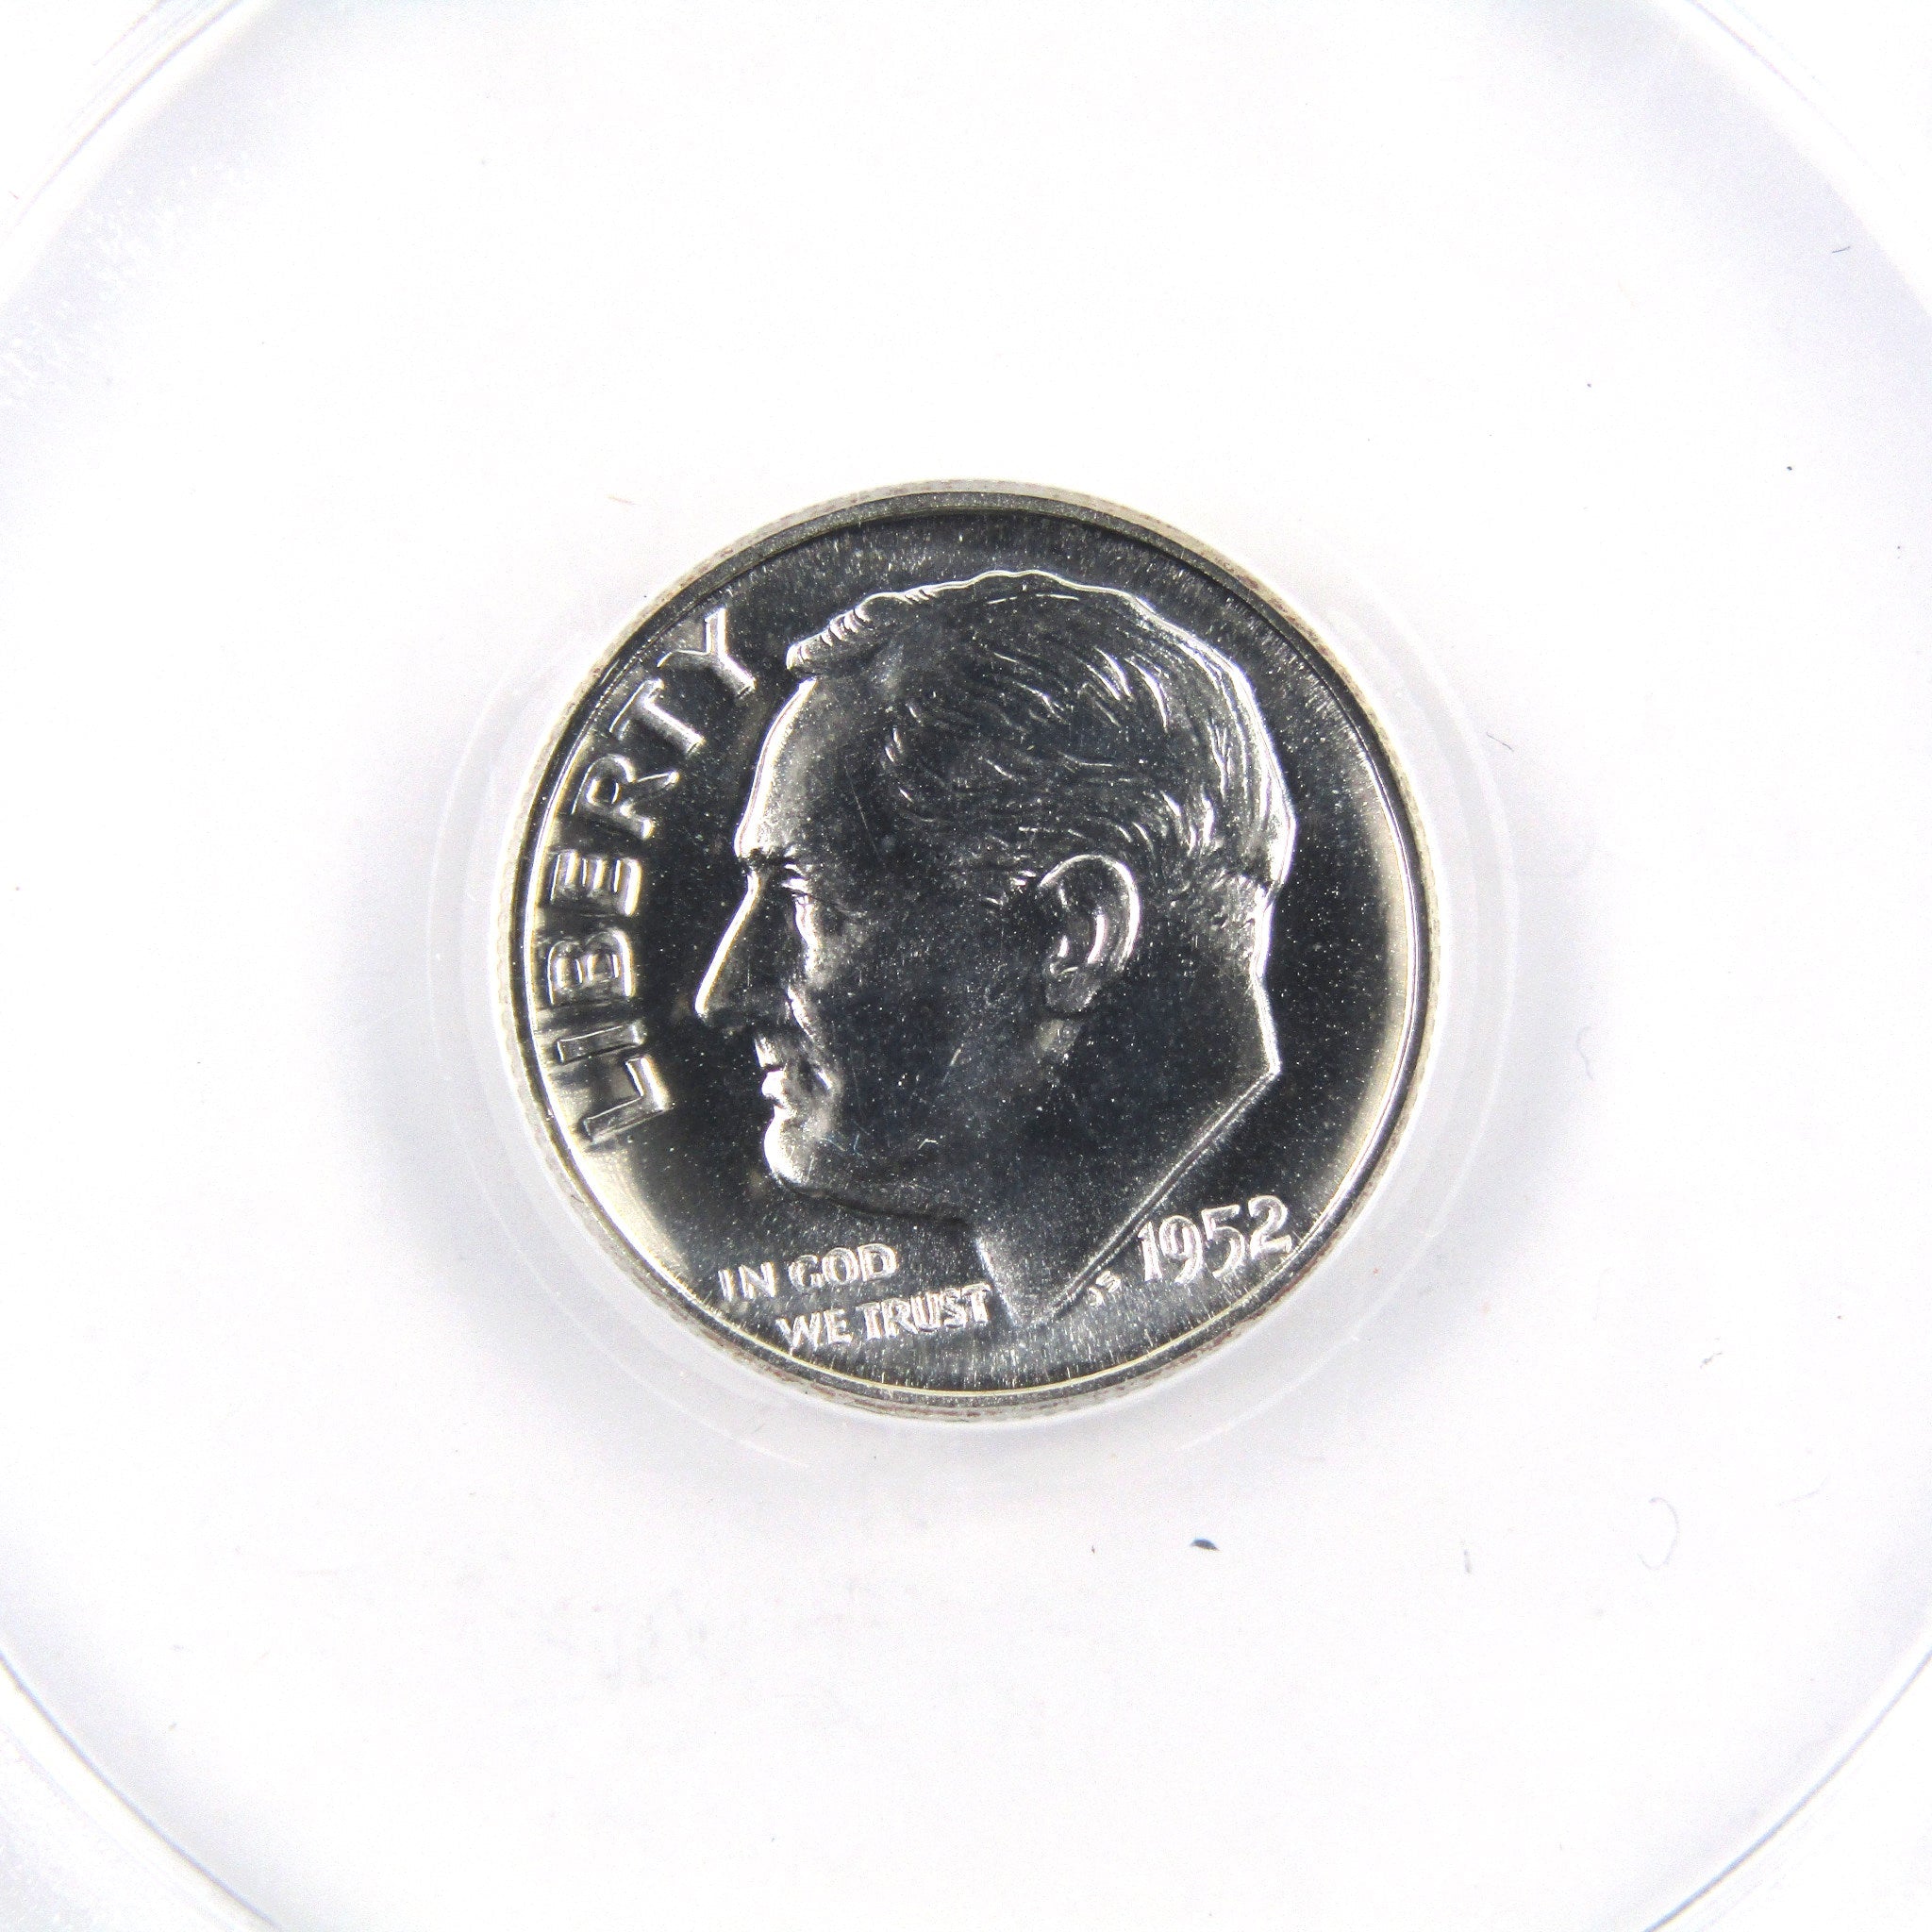 1952 Roosevelt Dime PF 66 ANACS 90% Silver 10c Proof Coin SKU:CPC2389